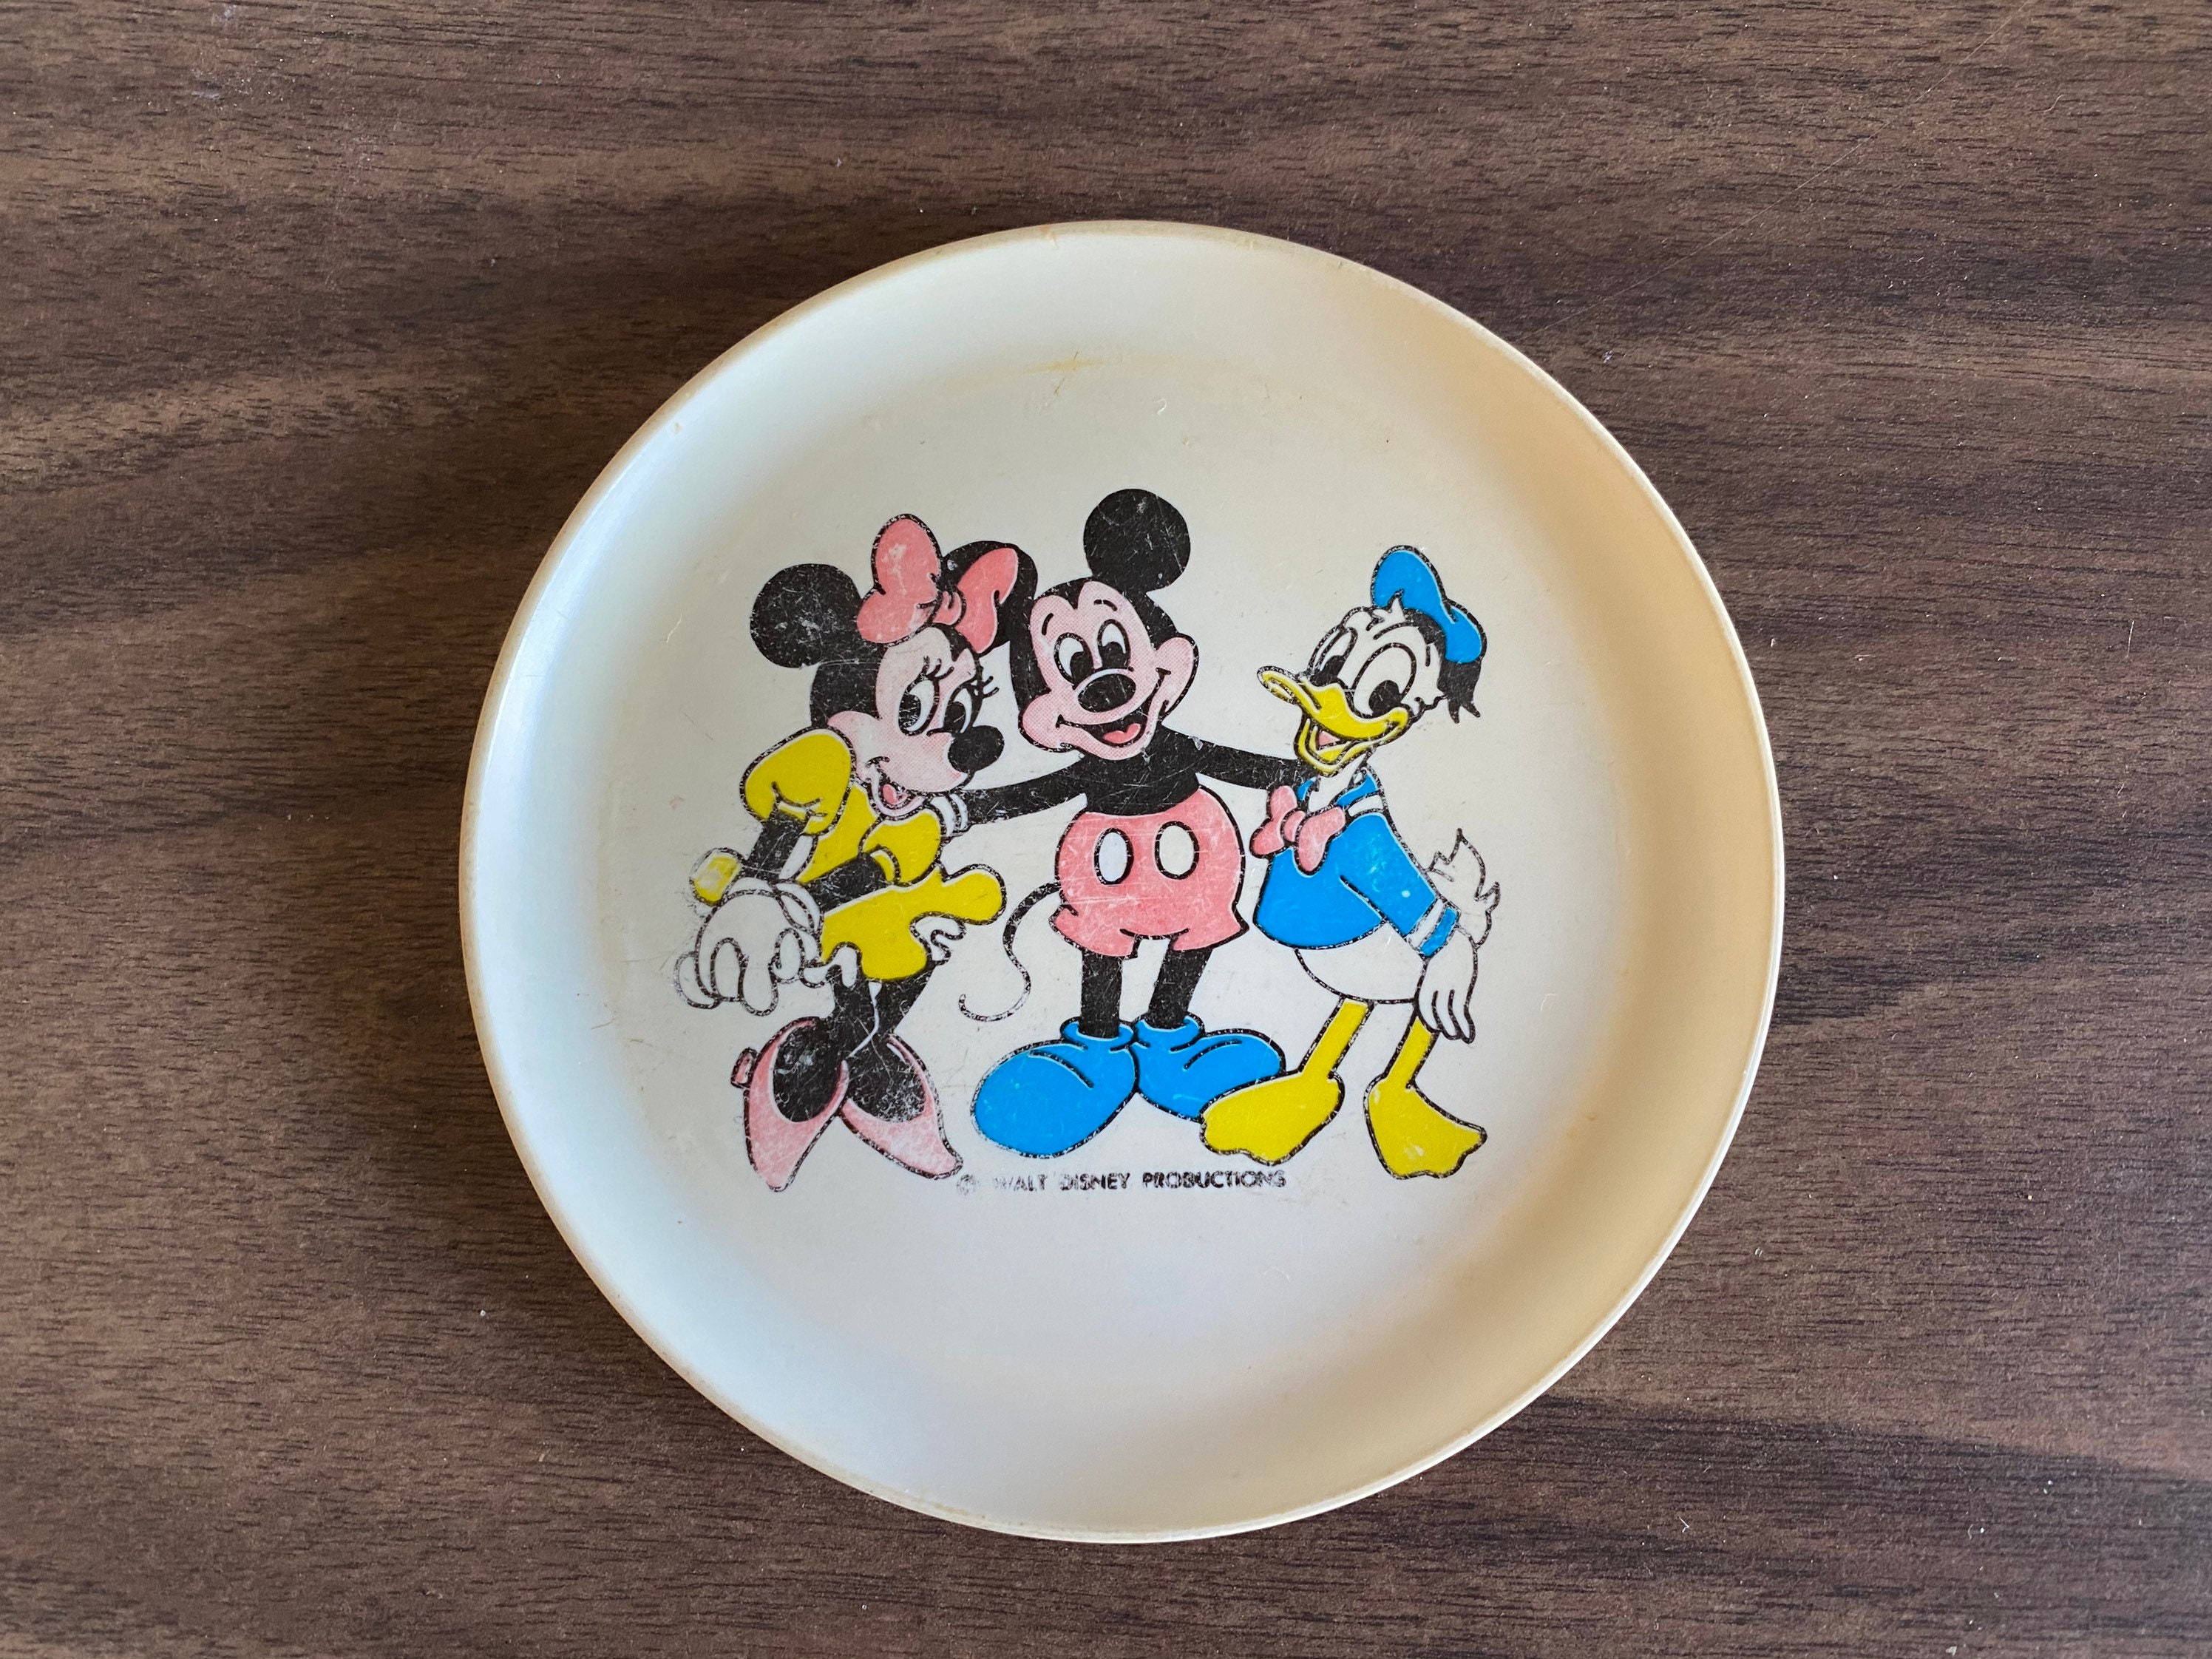 DISNEY MICKEY MOUSE Vintage Style Plate Cup Bowl Silverware Set Kids  Children